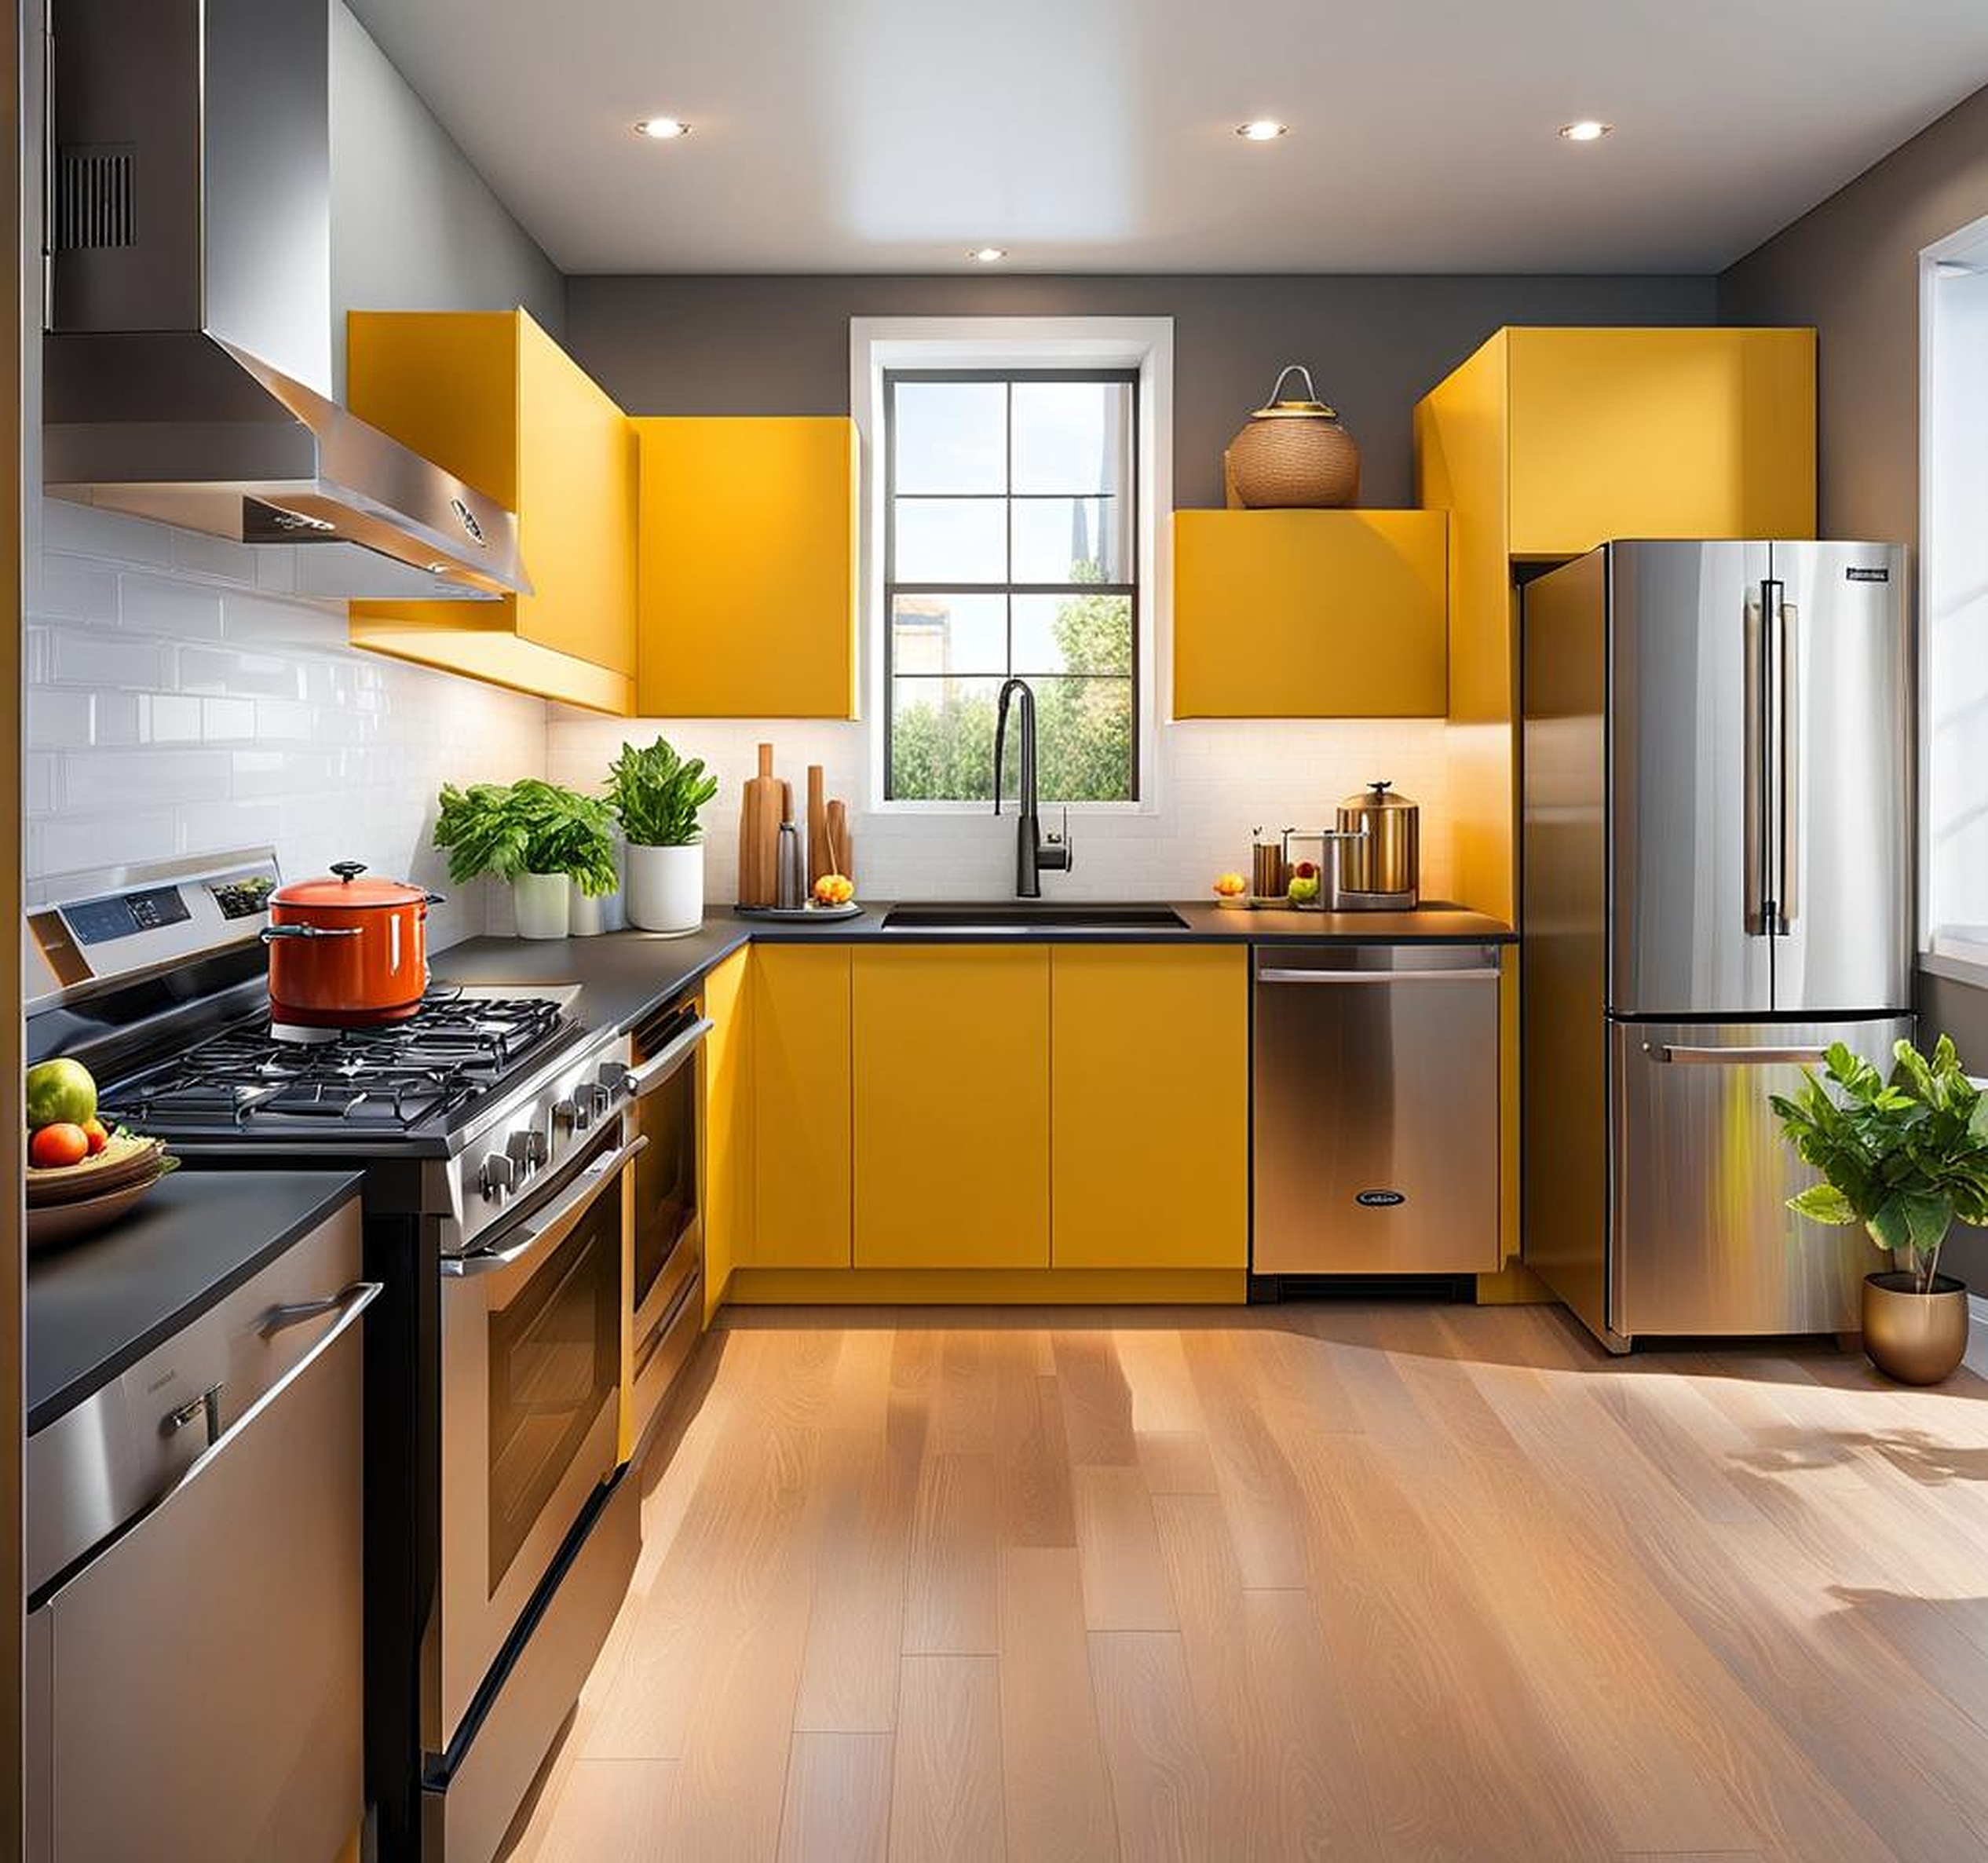 How to Choose the Right Compact Appliances for Your Small Kitchen